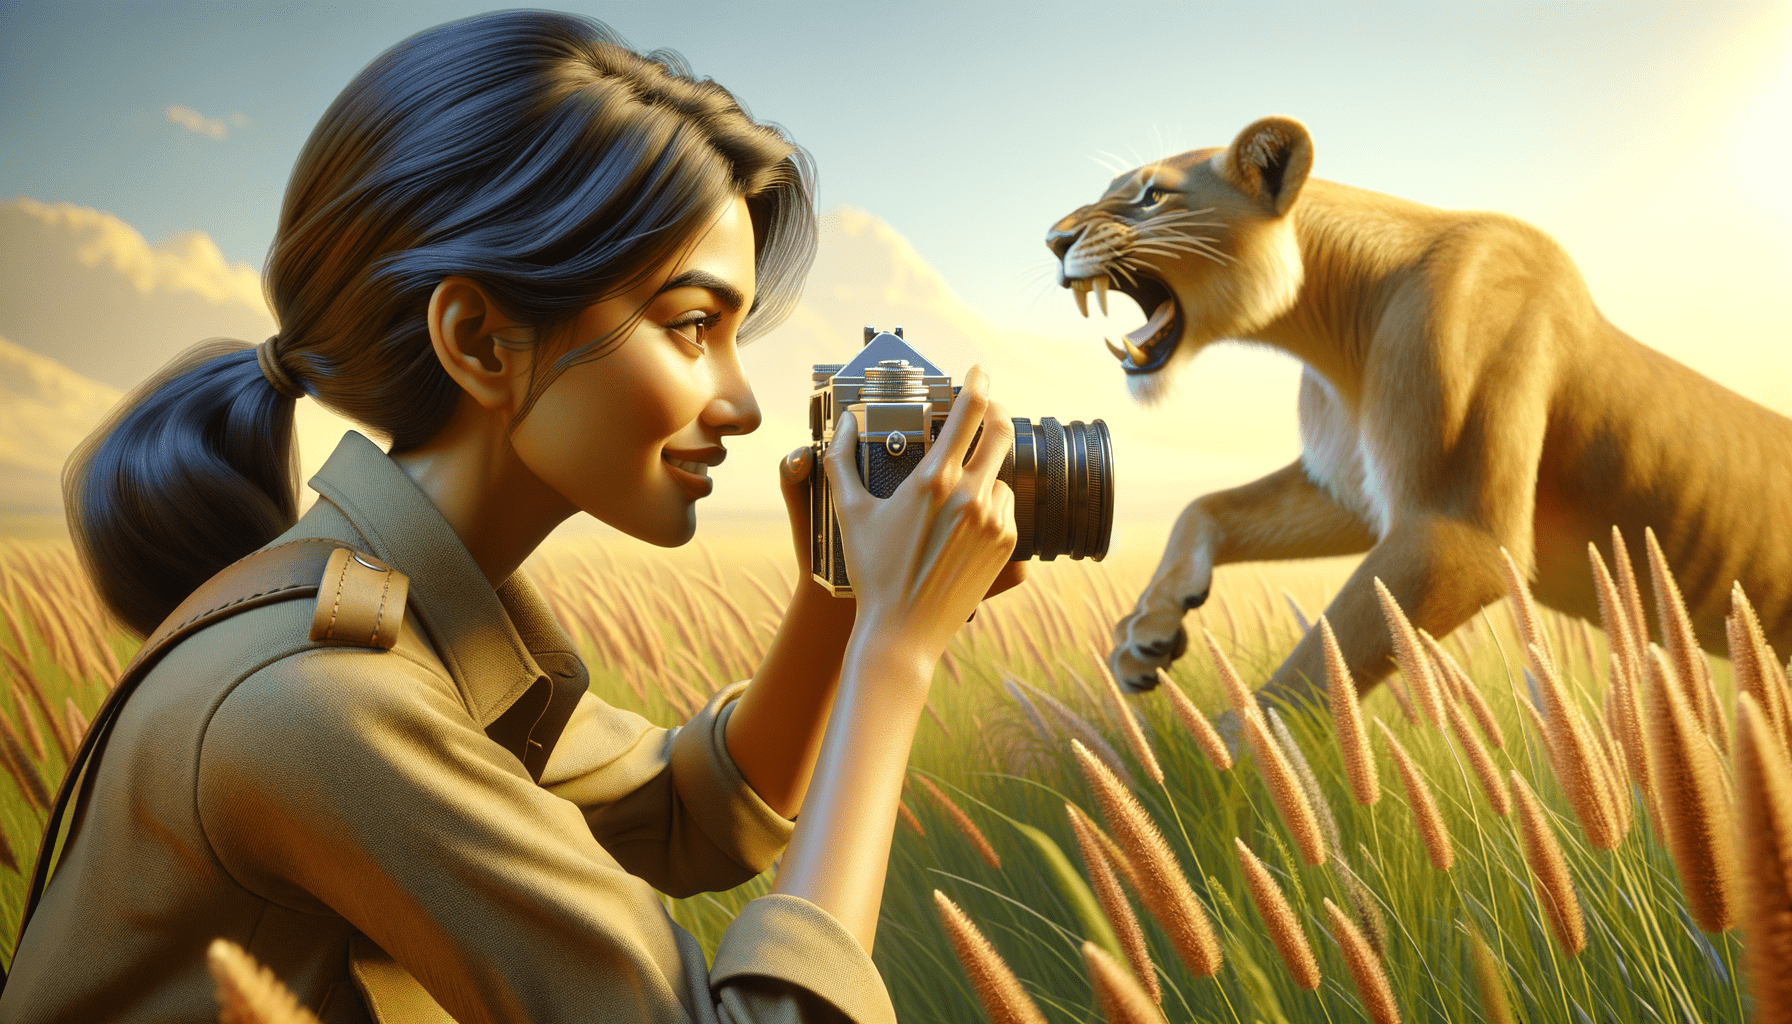 Kamala Harris, clad in khaki, a Leica camera pressed to his eye, capturing the intensity of a lioness stalking prey in the tall grasses of the Serengeti. His face is etched with concentration and a deep respect for the wild beauty surrounding him.